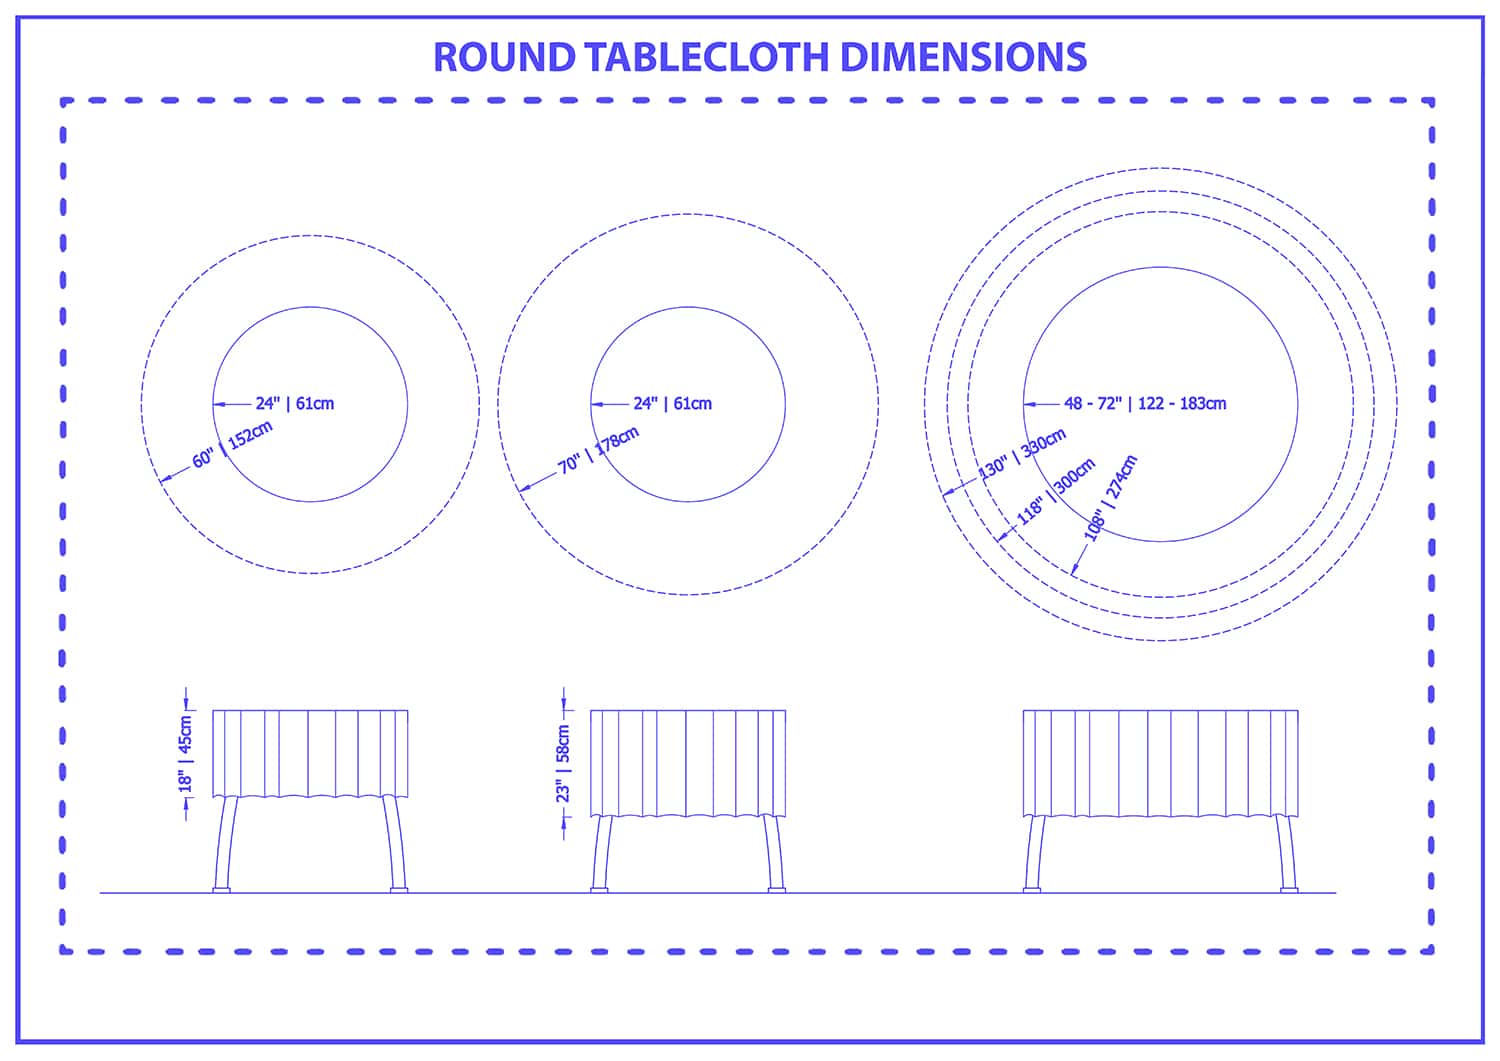 Round tablecloth dimensions